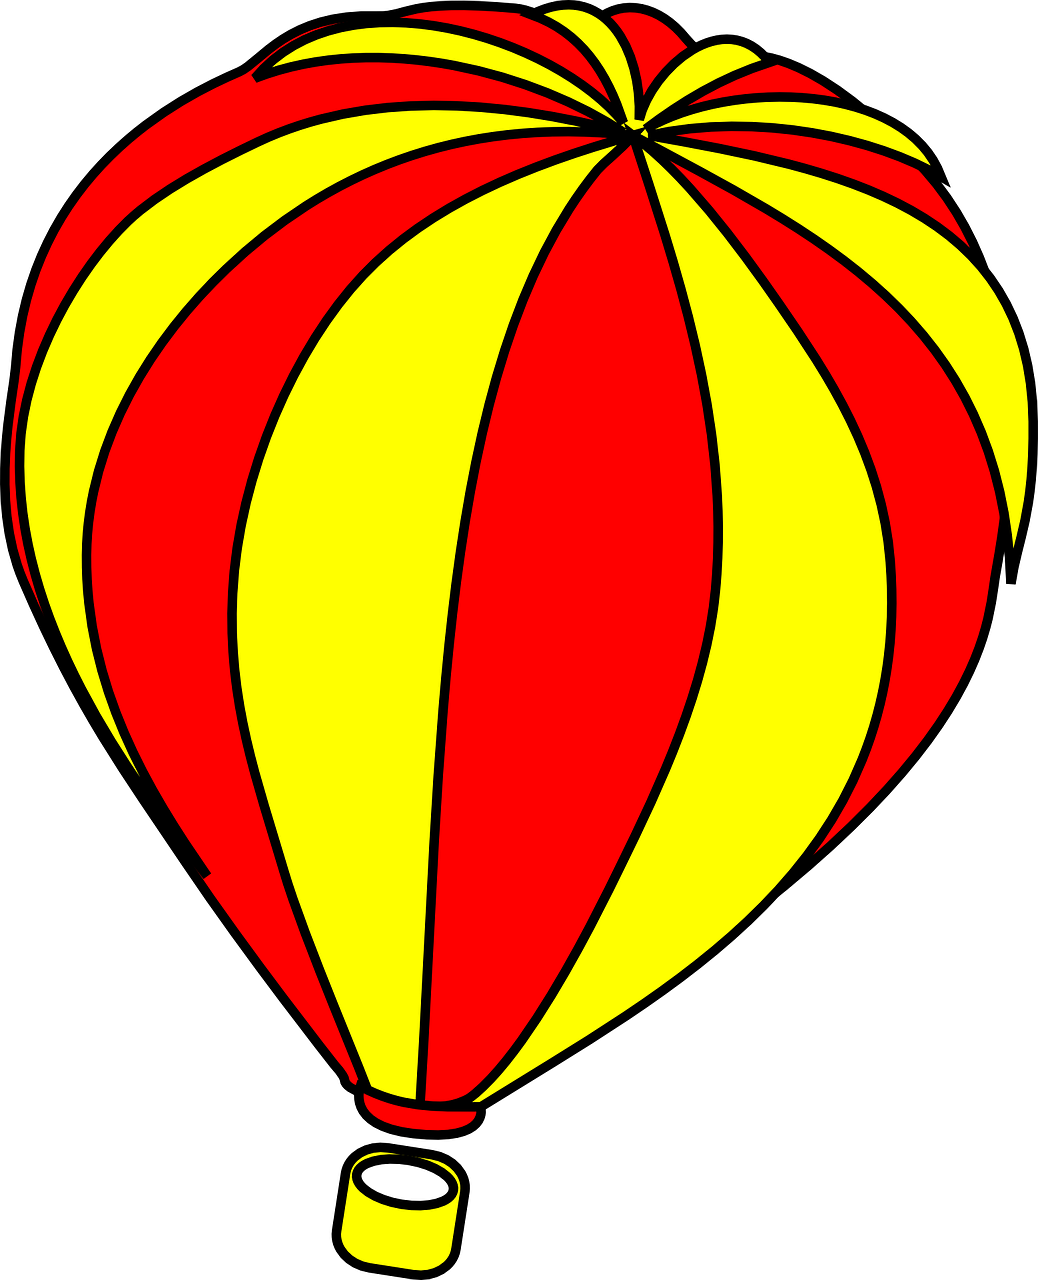 Hot-Air Balloon Fly Yellow Red